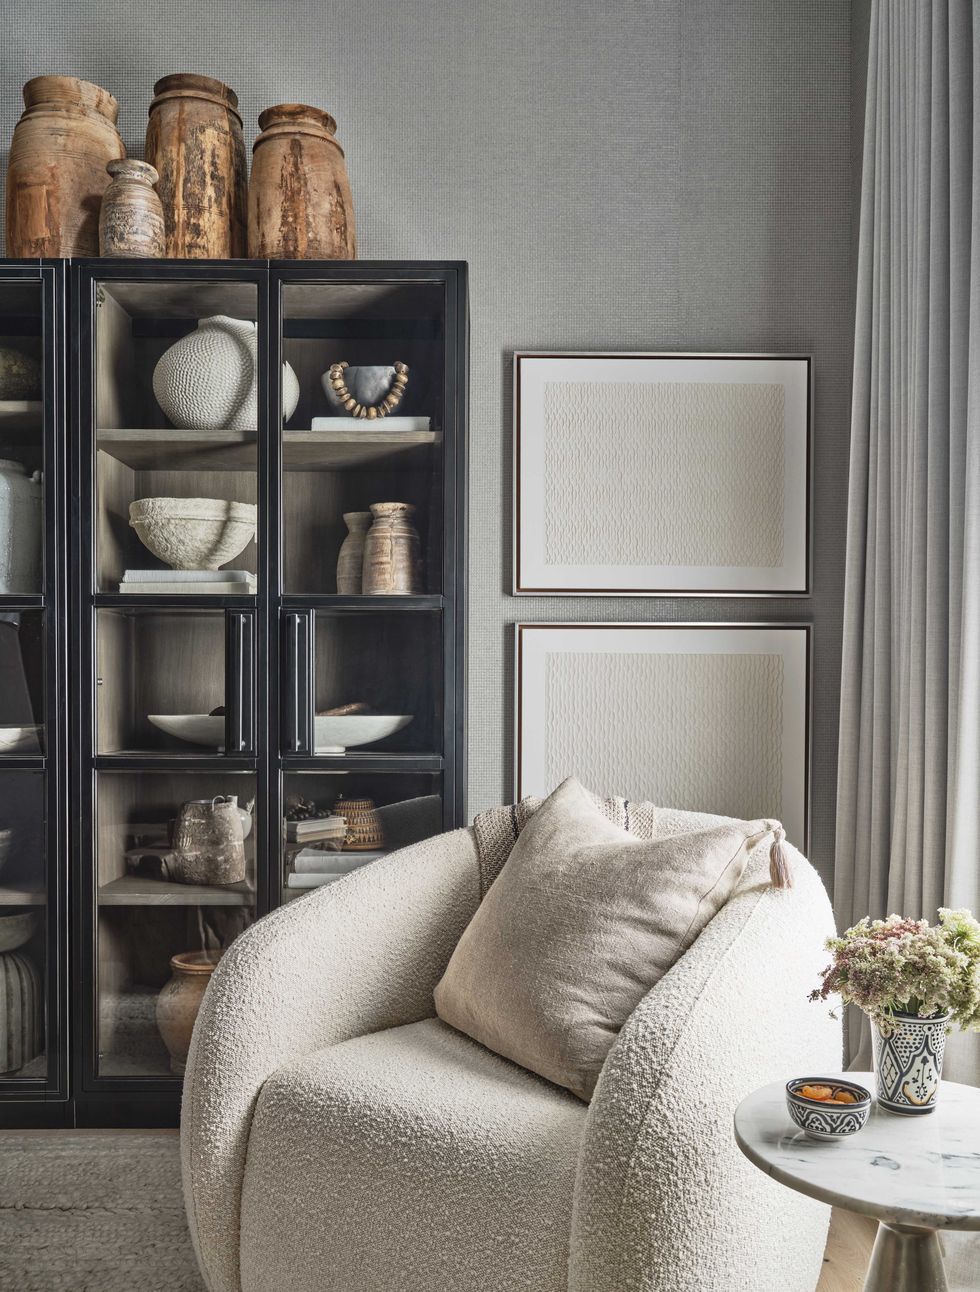 white lounge chair, black bookcase, wooden vases